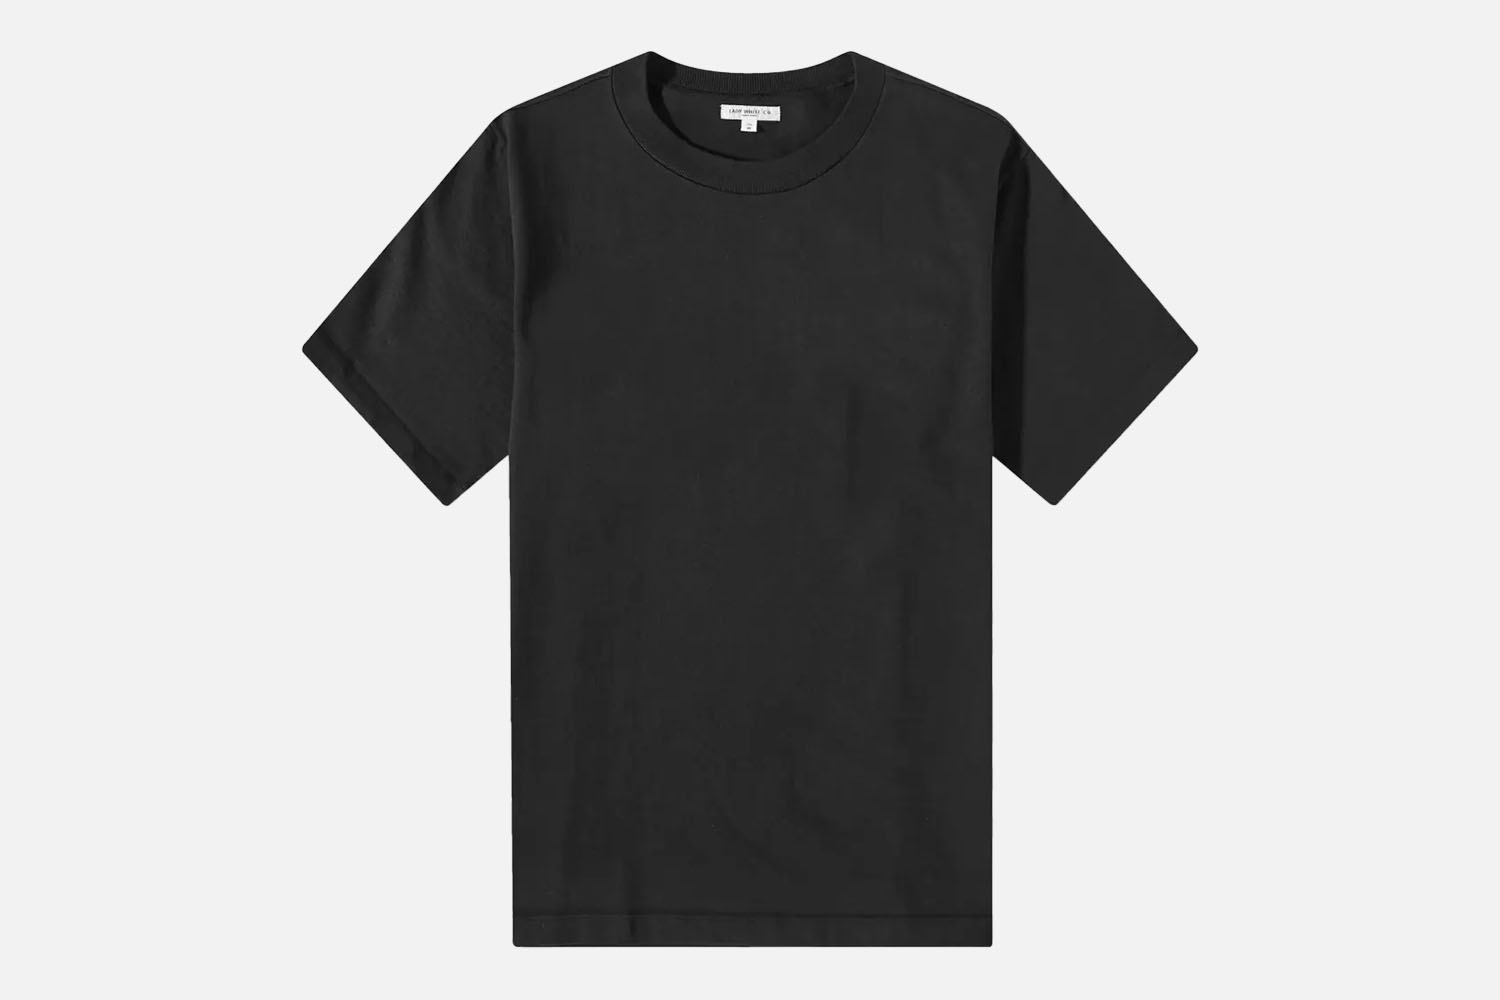 Lady White Co. Two-Pack Black 'Our T-Shirt' T-Shirts